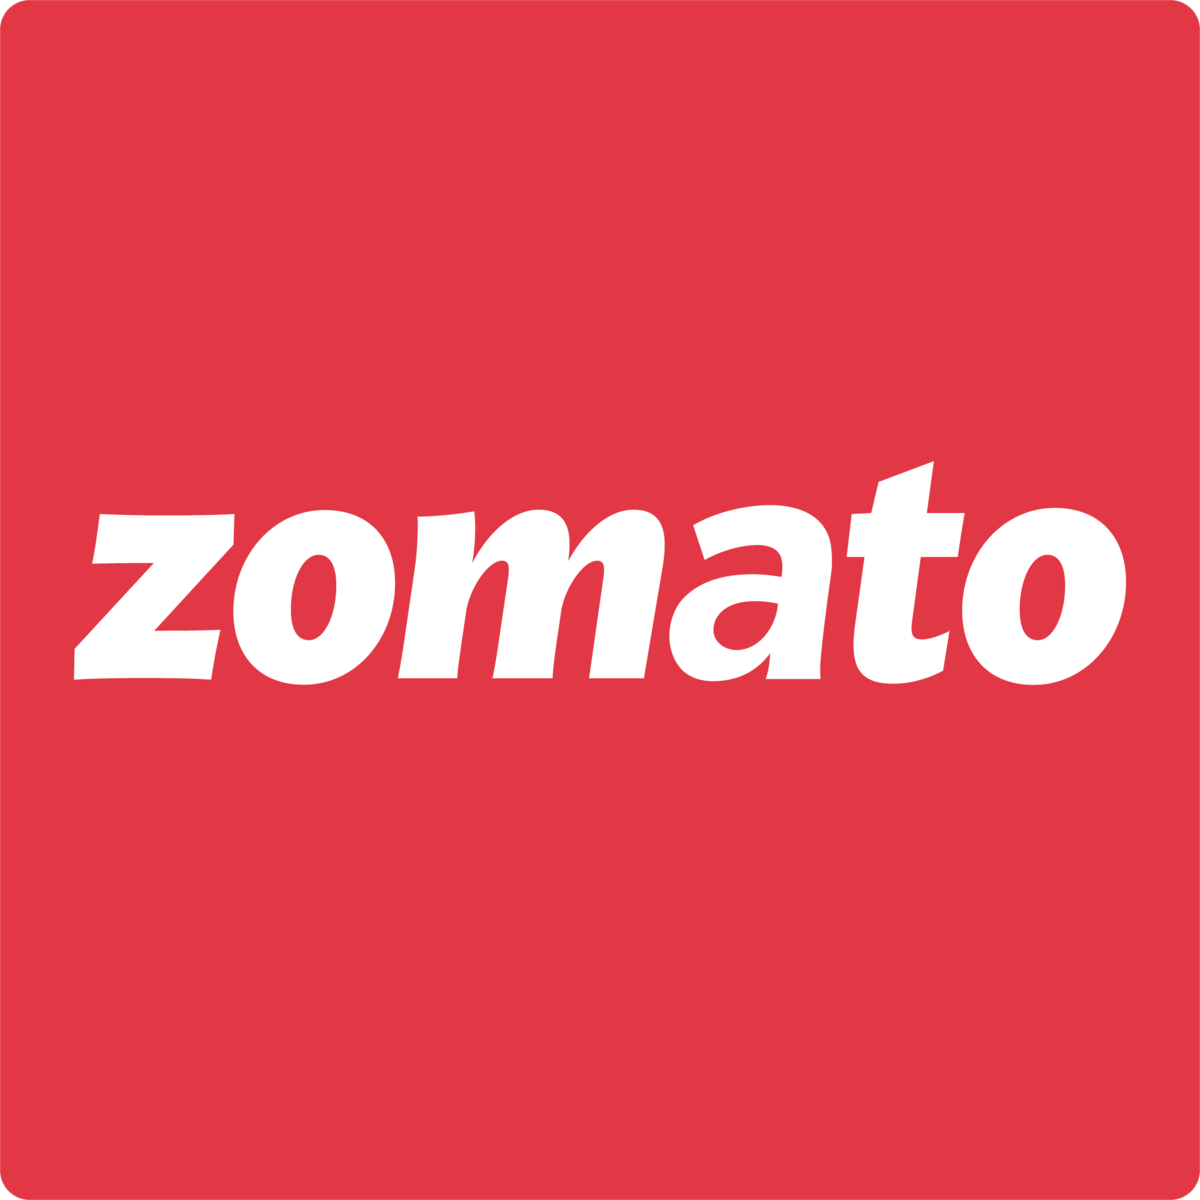 After Mumbai & B’luru, Zomato expands priority food delivery service to 3 more cities